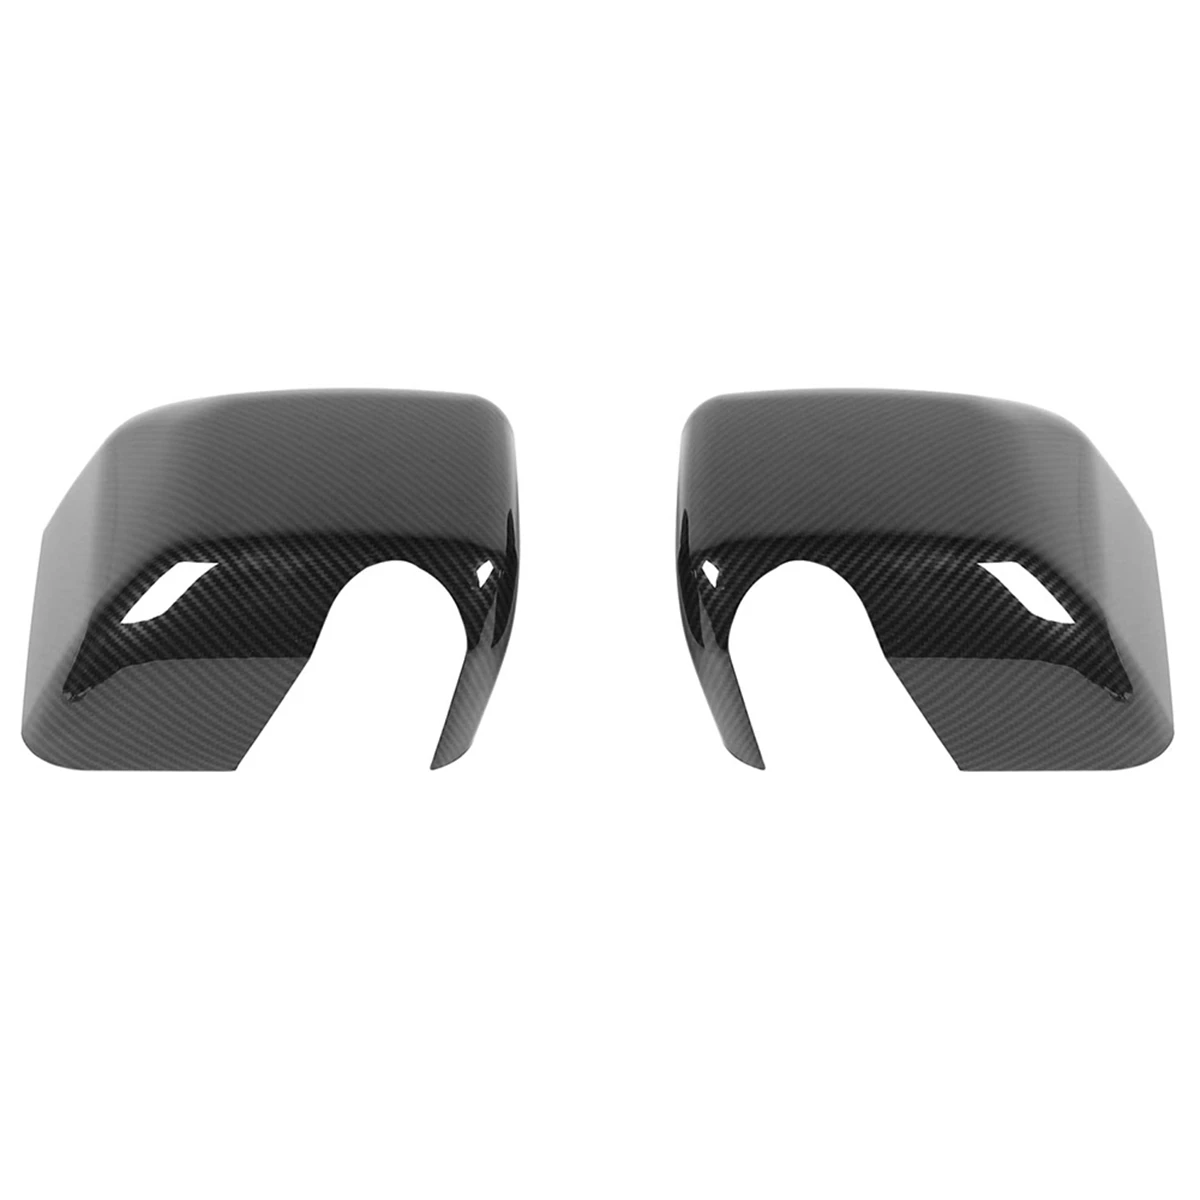 

Side Mirrors Cover ABS Rear View Mirrors Trim Interior Accessories for Jeep Wrangler JK 2007-2017 ,Carbon